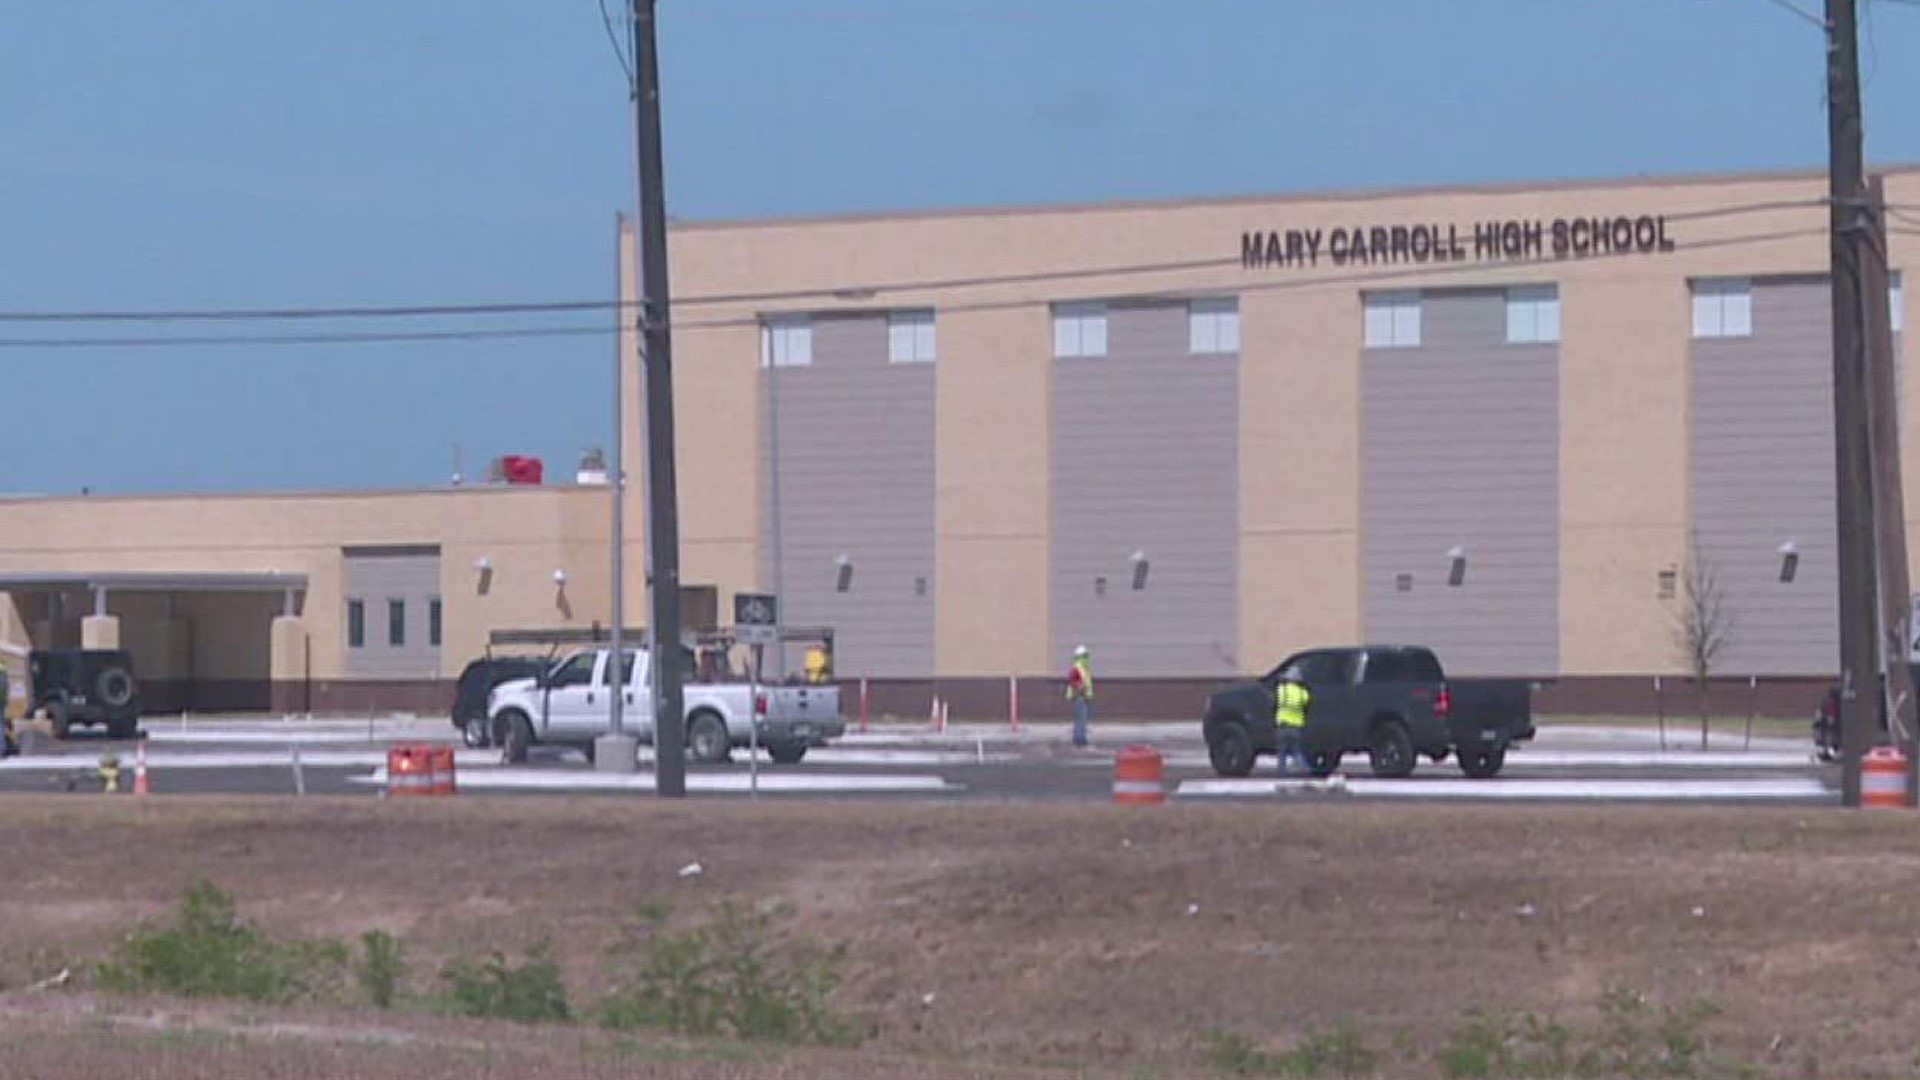 Work is also nearing completion of the Mary Carroll High School.